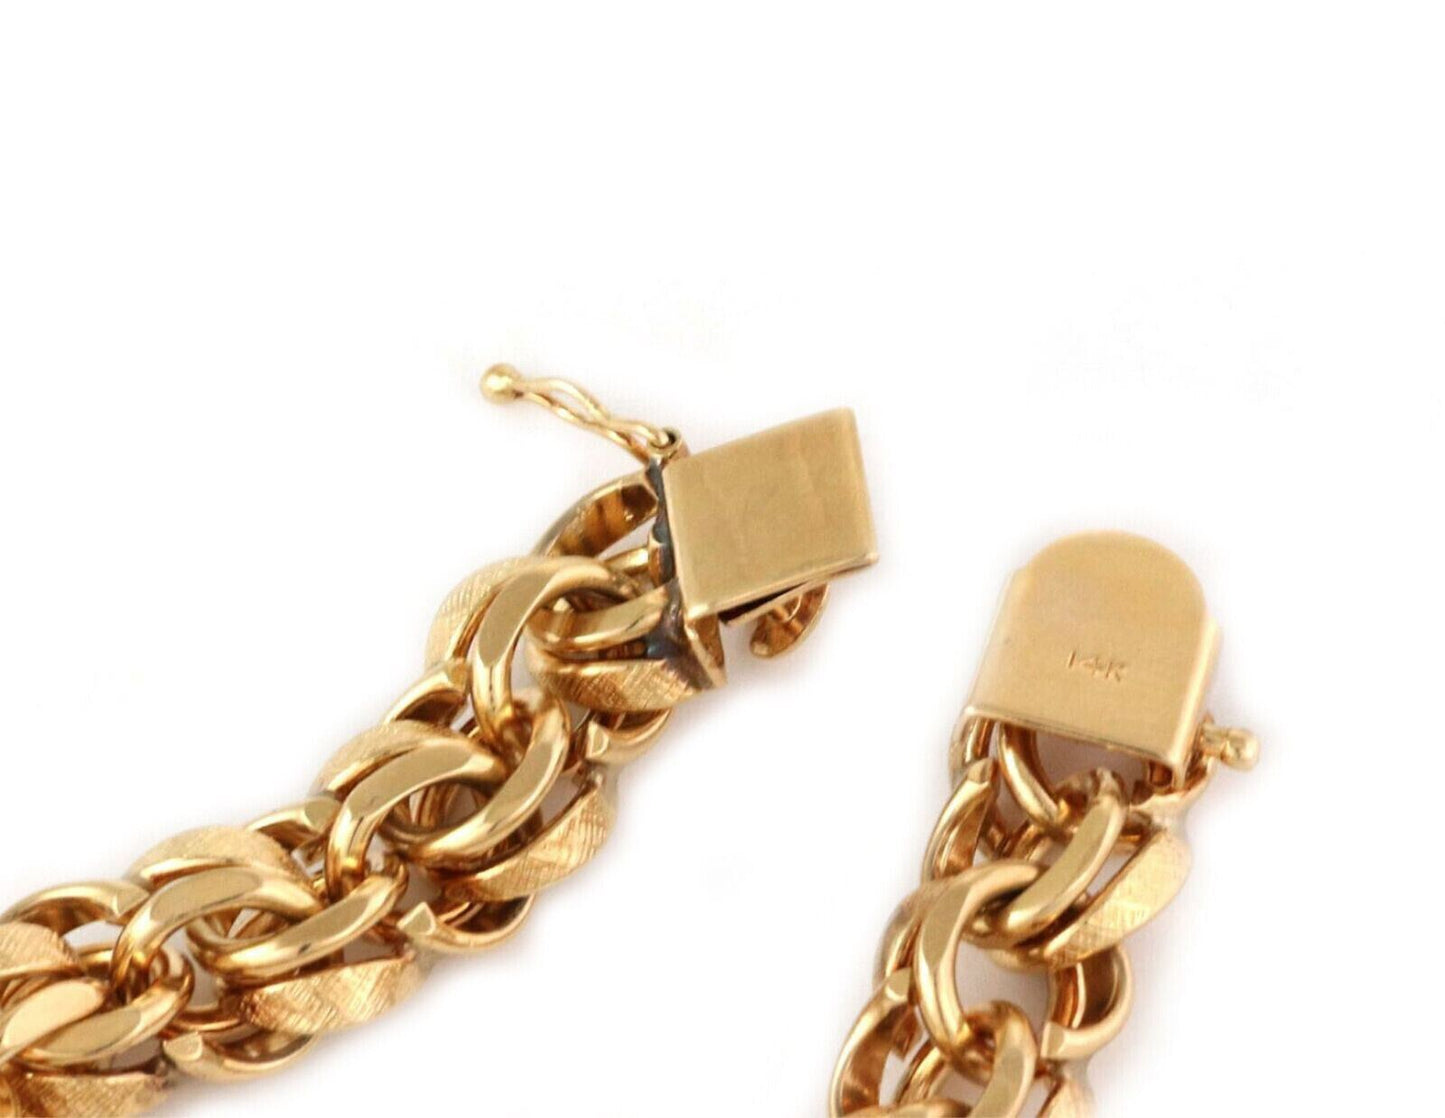 Double Ring Chain 14k Yellow Gold Charm Bracelet